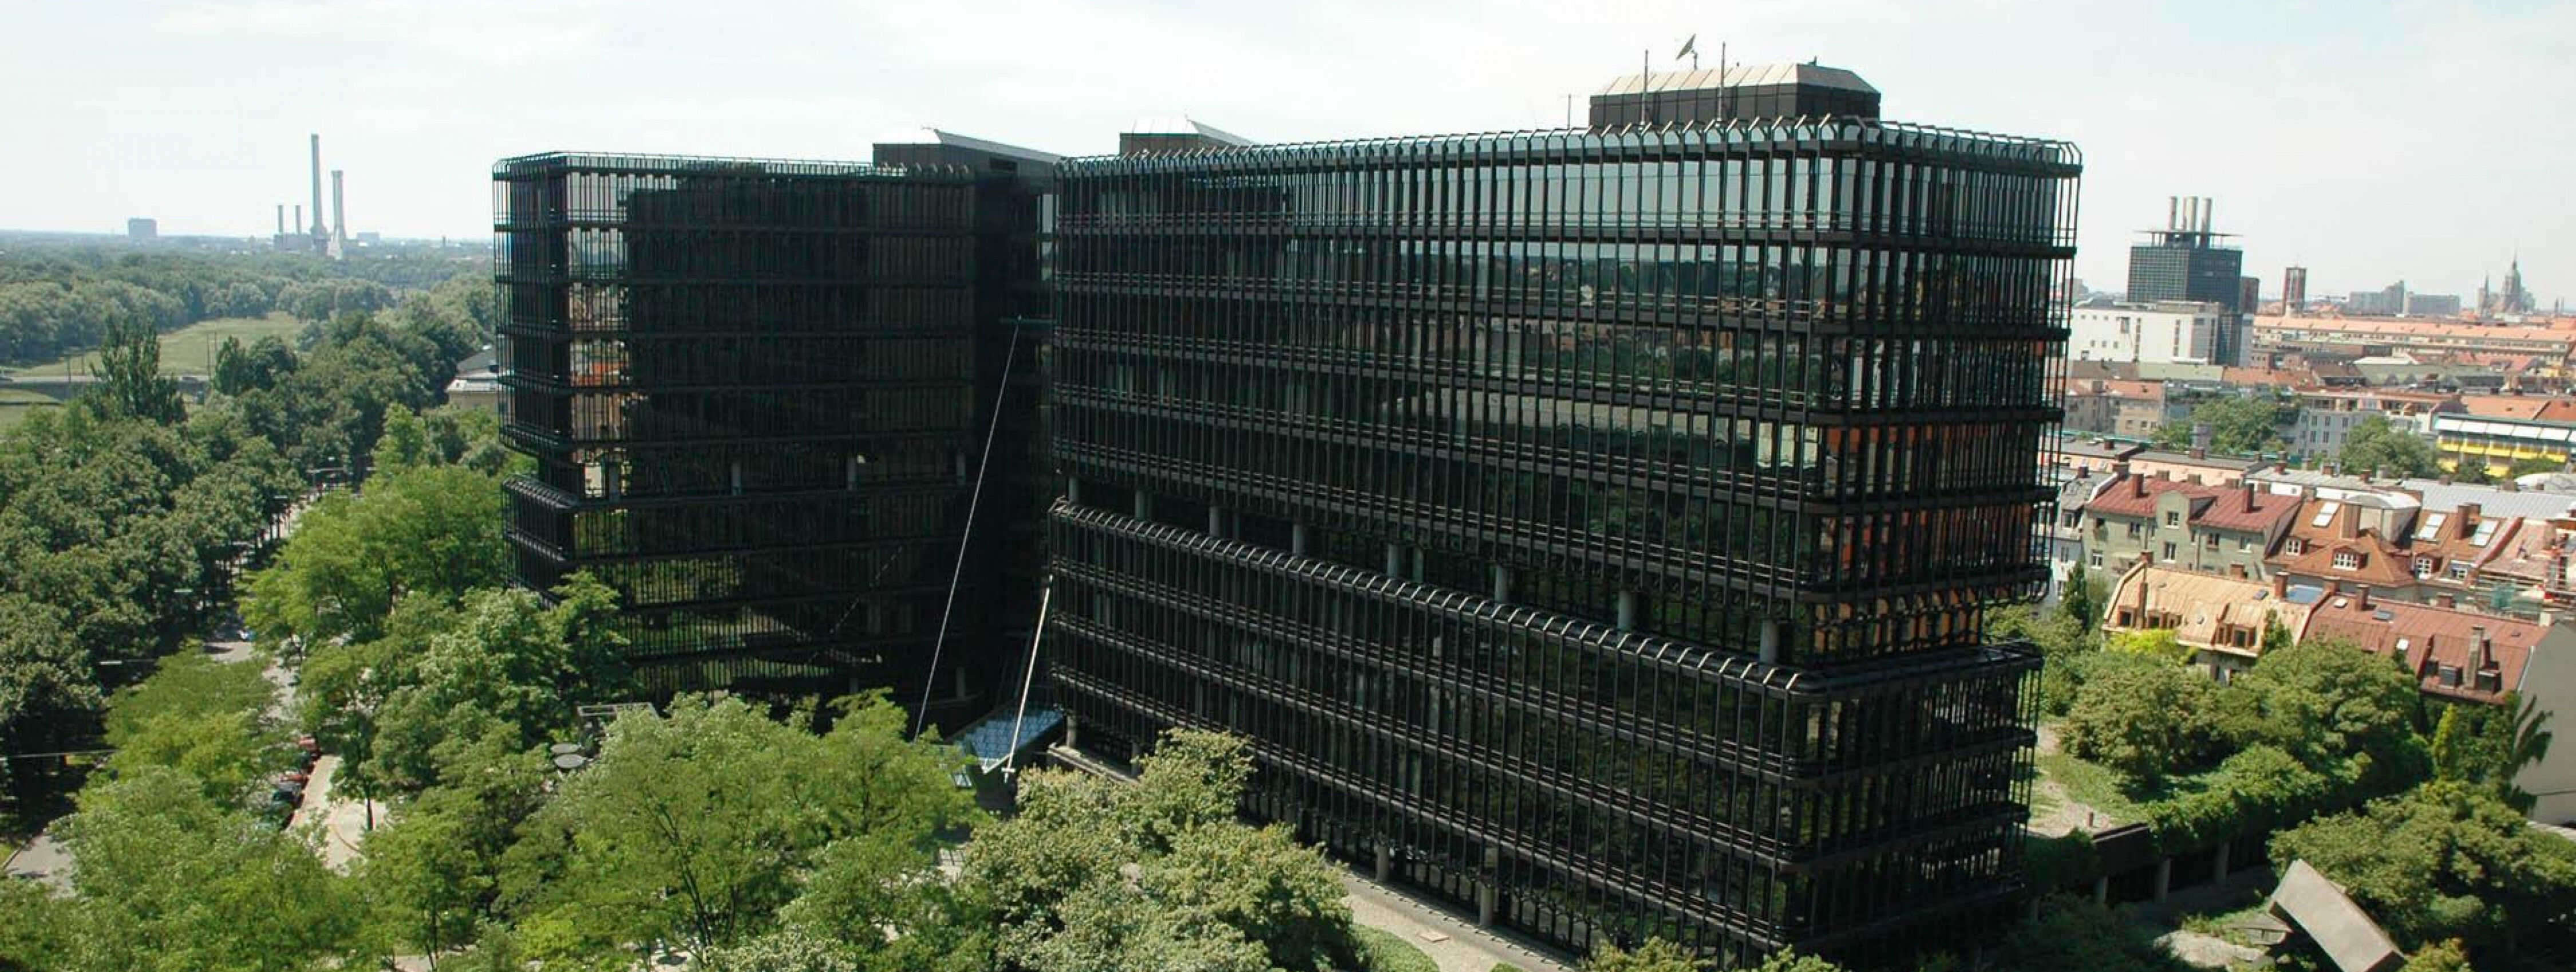 Telelift in the European Patent Office